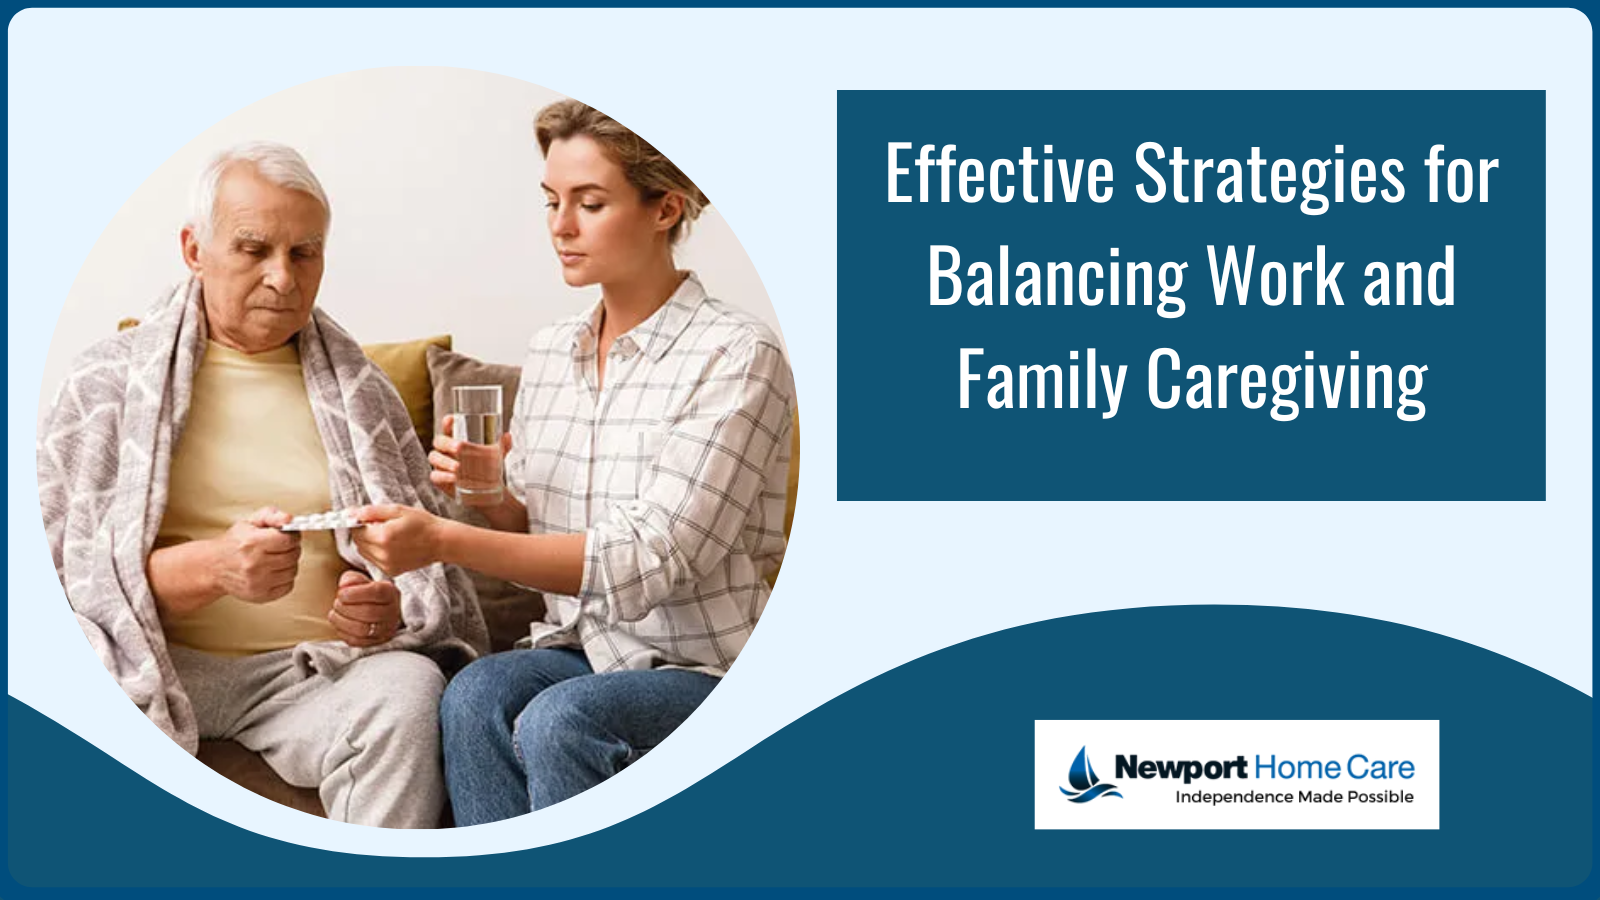 Effective Strategies for Balancing Work and Family Caregiving